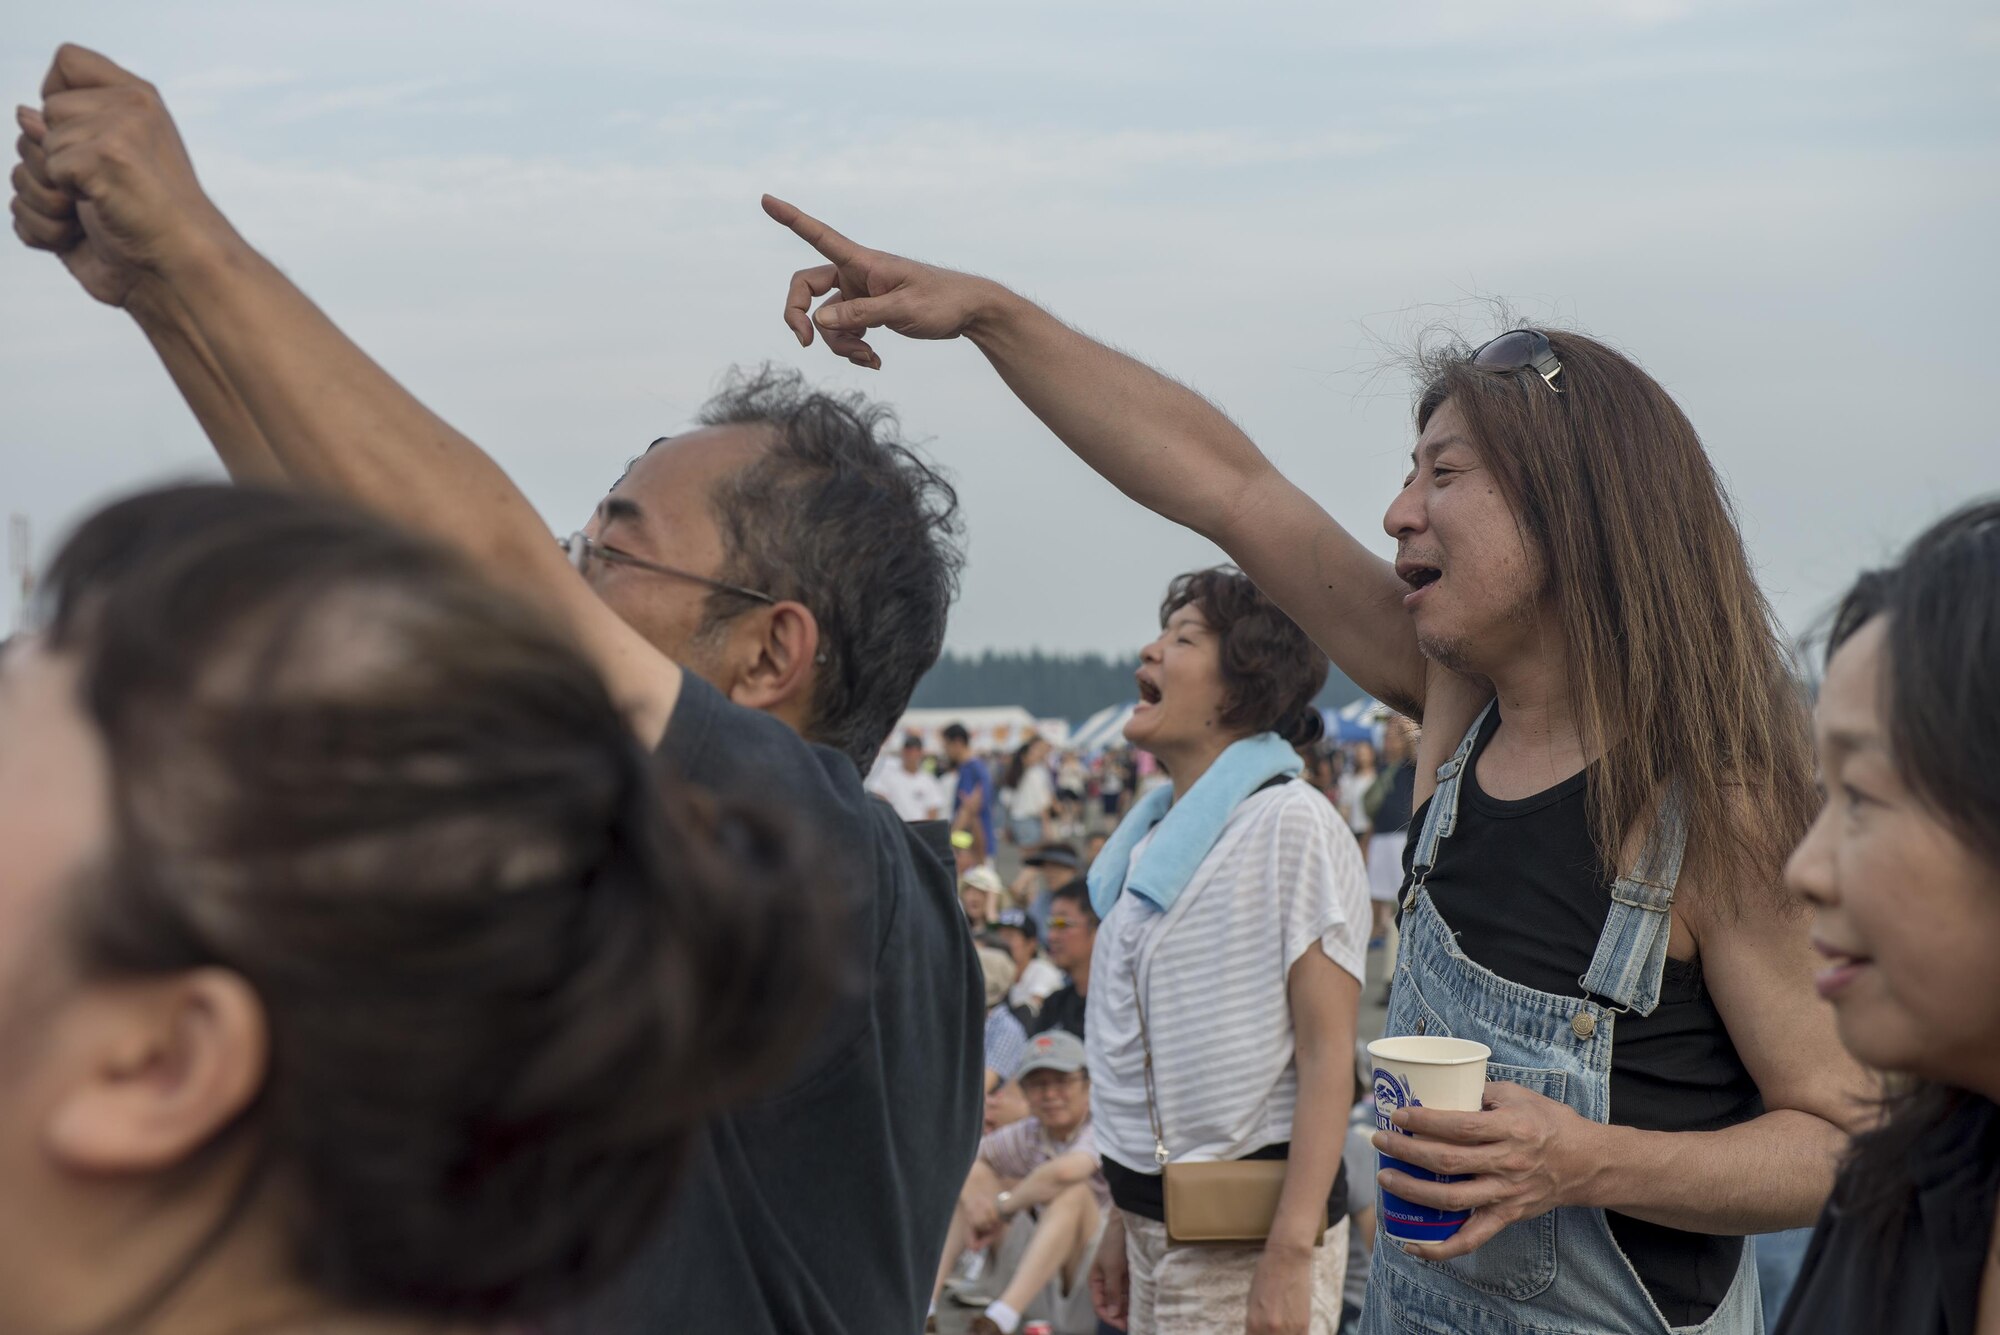 2016 Friendship Festival attendees rock out at Yokota Air Base, Japan, Sept. 17, 2016. The festival included more than 15 musical performances across two stages. (U.S. Air Force photo by Senior Airman David C. Danford/Released)